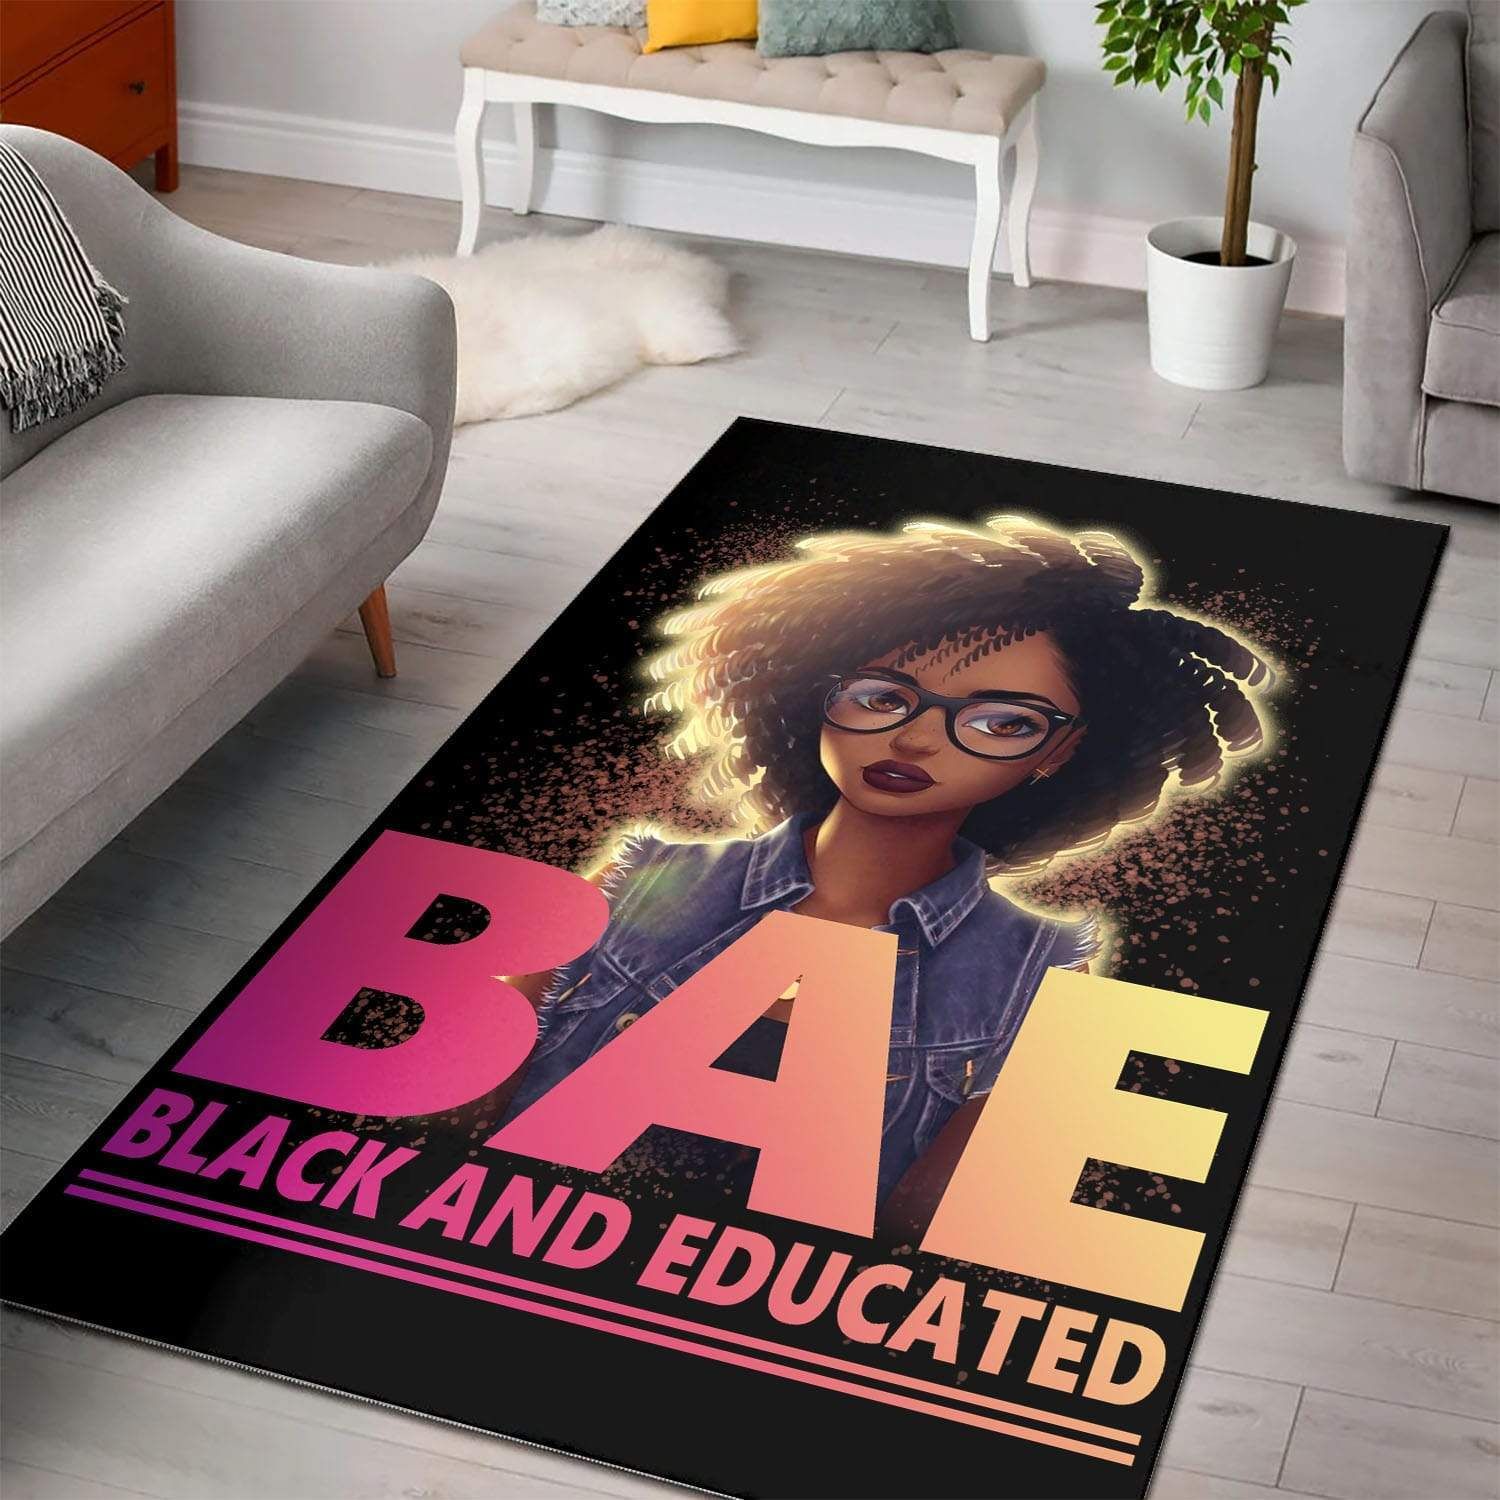 Bae Black And Educated Rectangle Rug